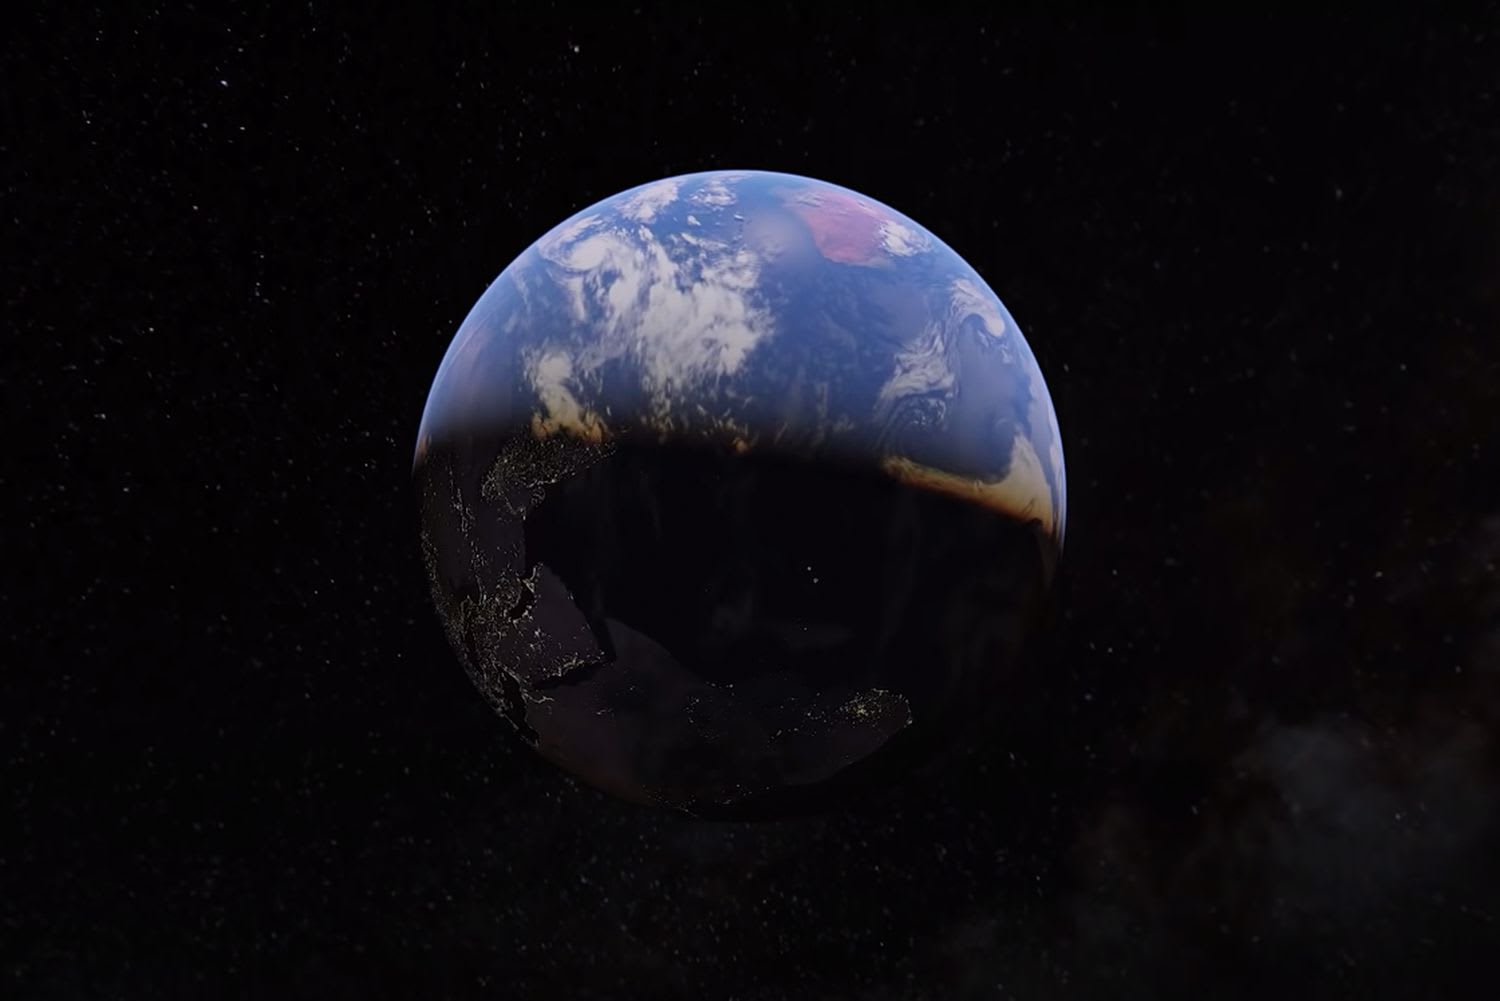 See How Drastically Climate Change Has Altered Our Planet With Google's New Timelapse Feature